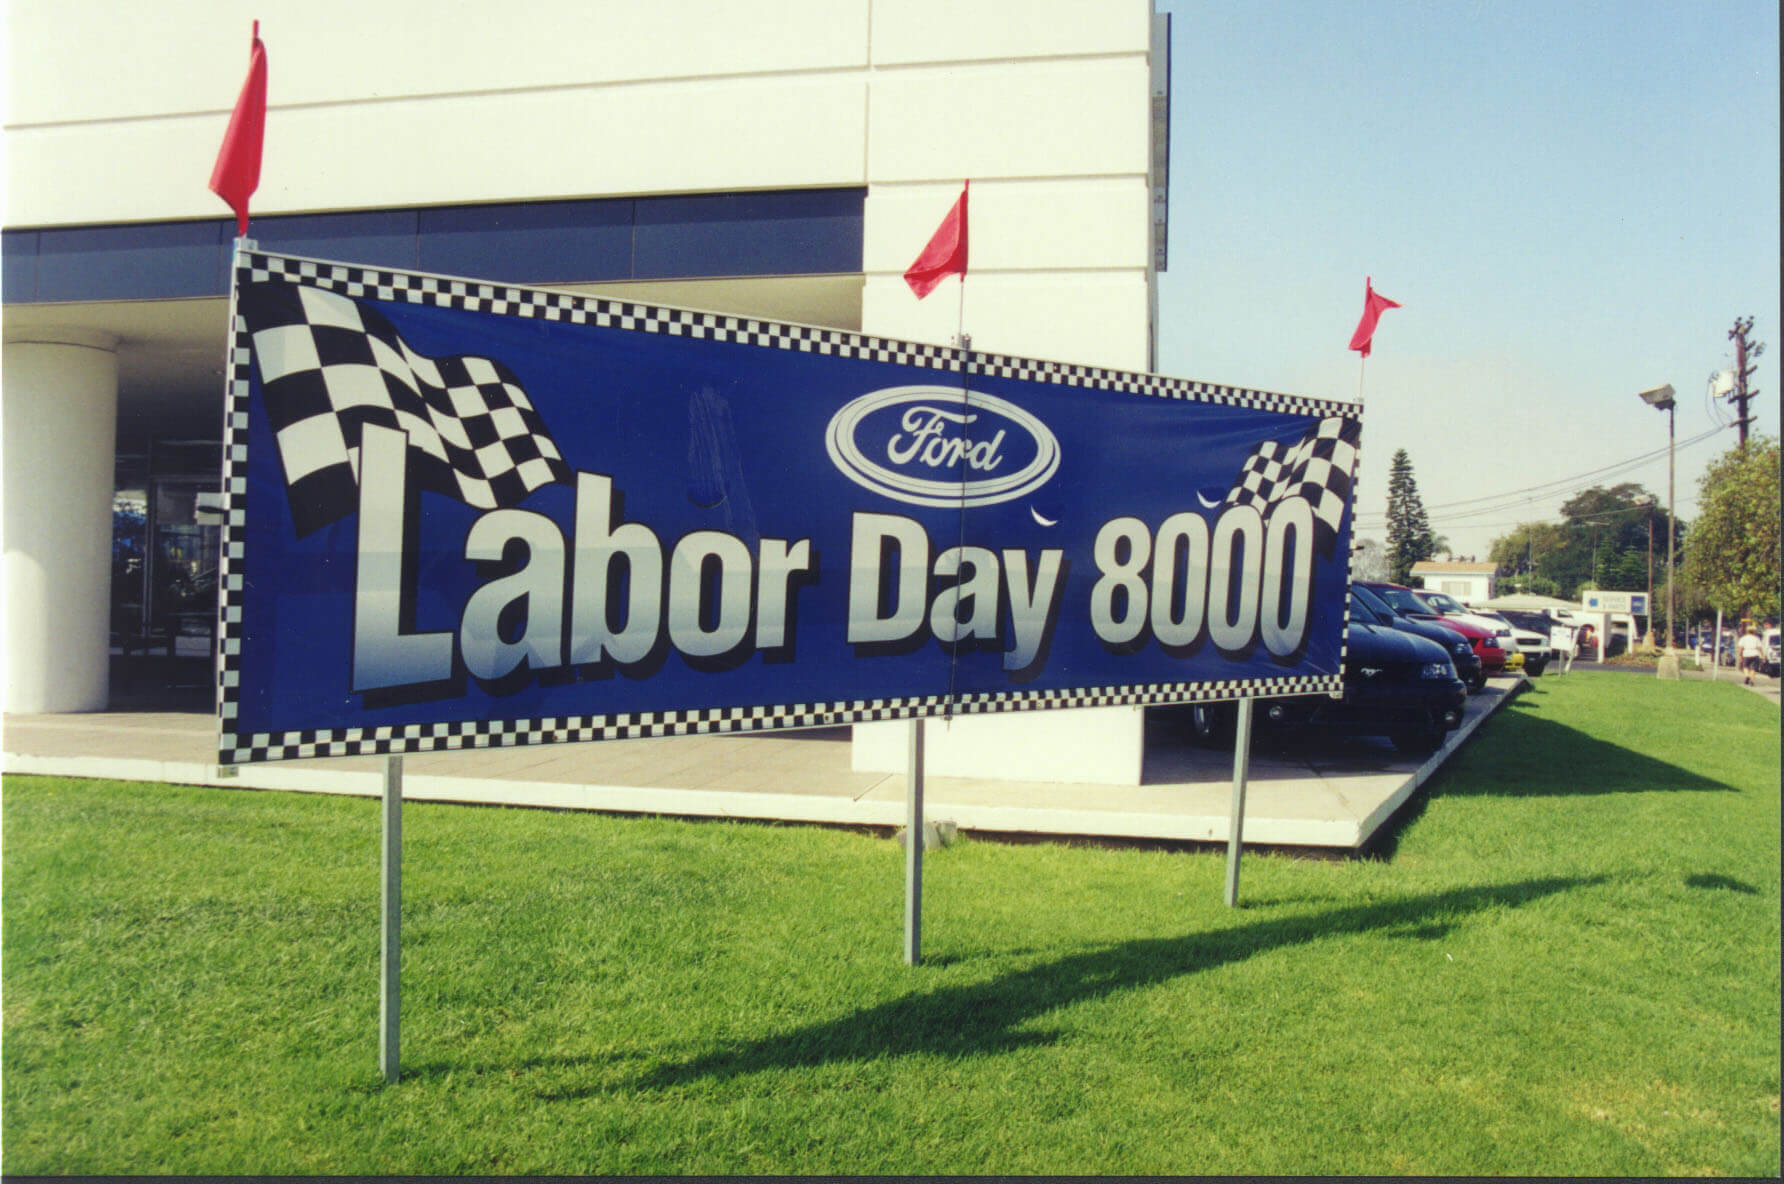 A lawn display for outdoor marketing in a car lot from Voxpop Marketing Systems